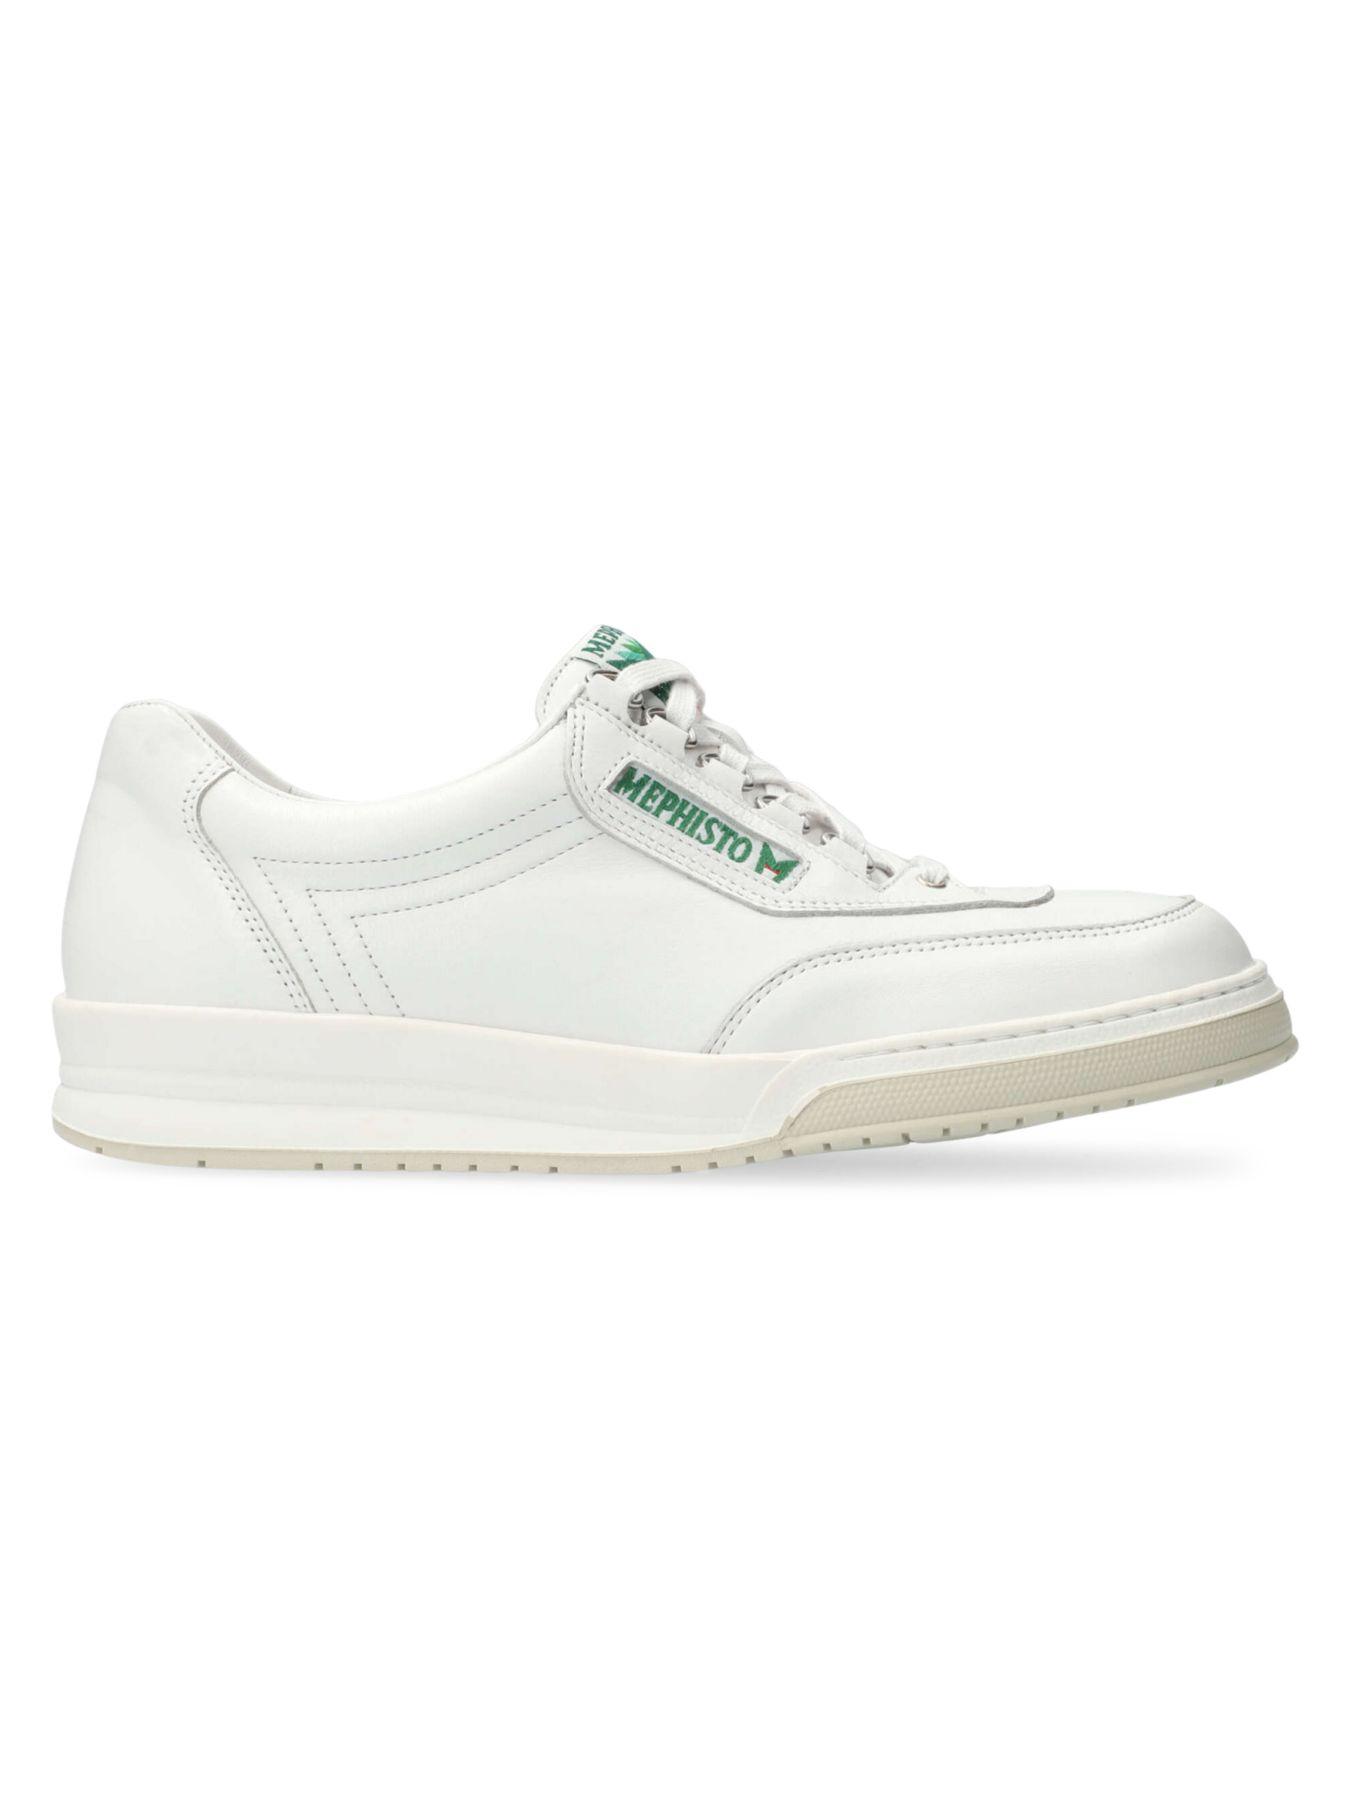 Mephisto Match Leather Tennis Sneakers in White for Men - Lyst